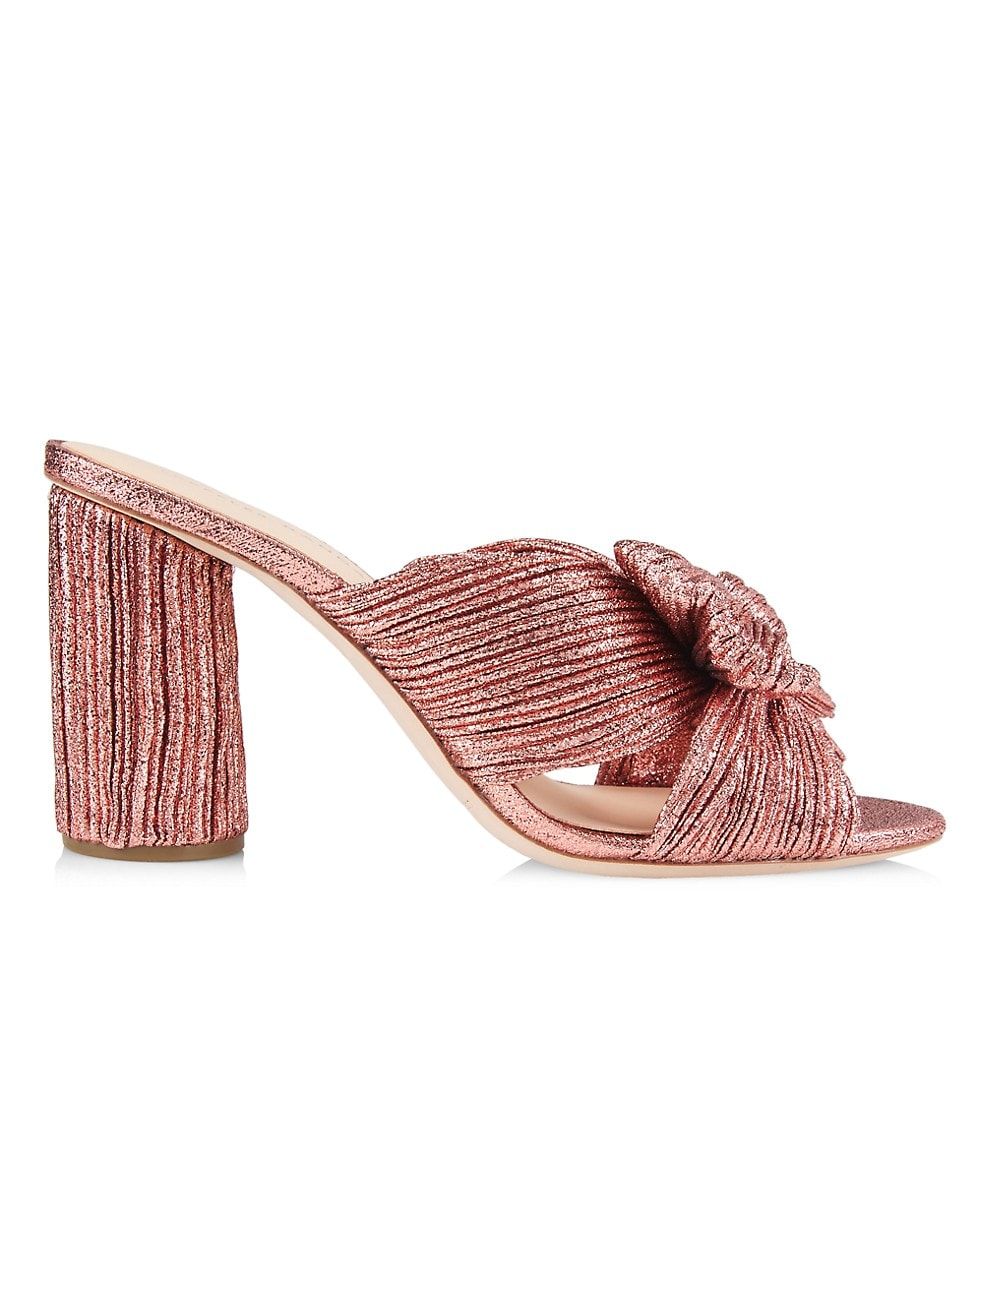 Penny Knot Mules | Saks Fifth Avenue